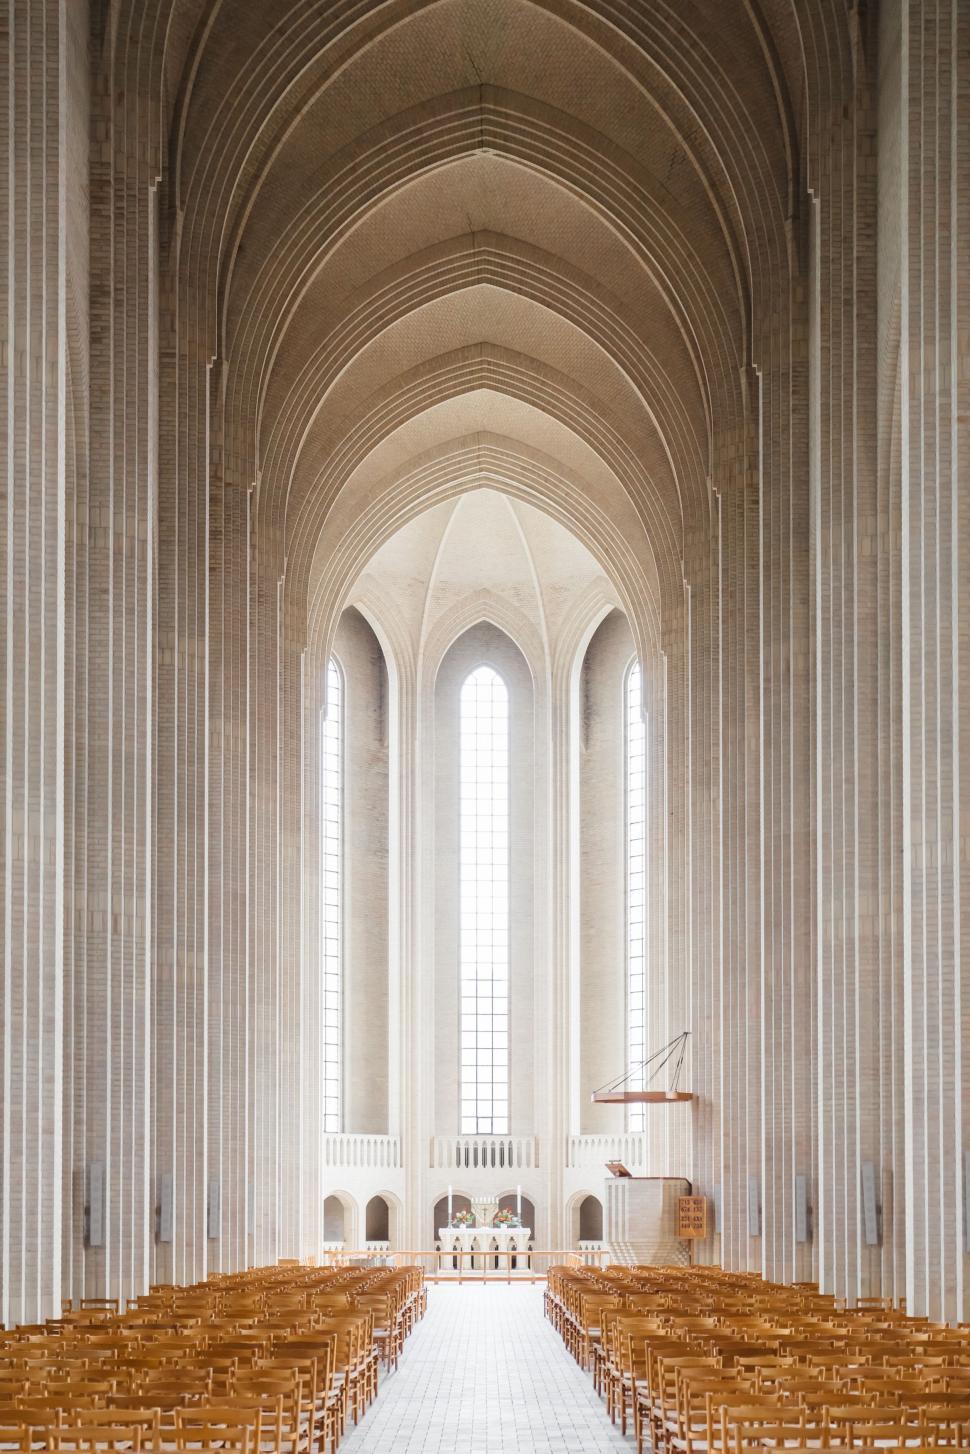 Free Image of Rows of Chairs and Large Window in Church 